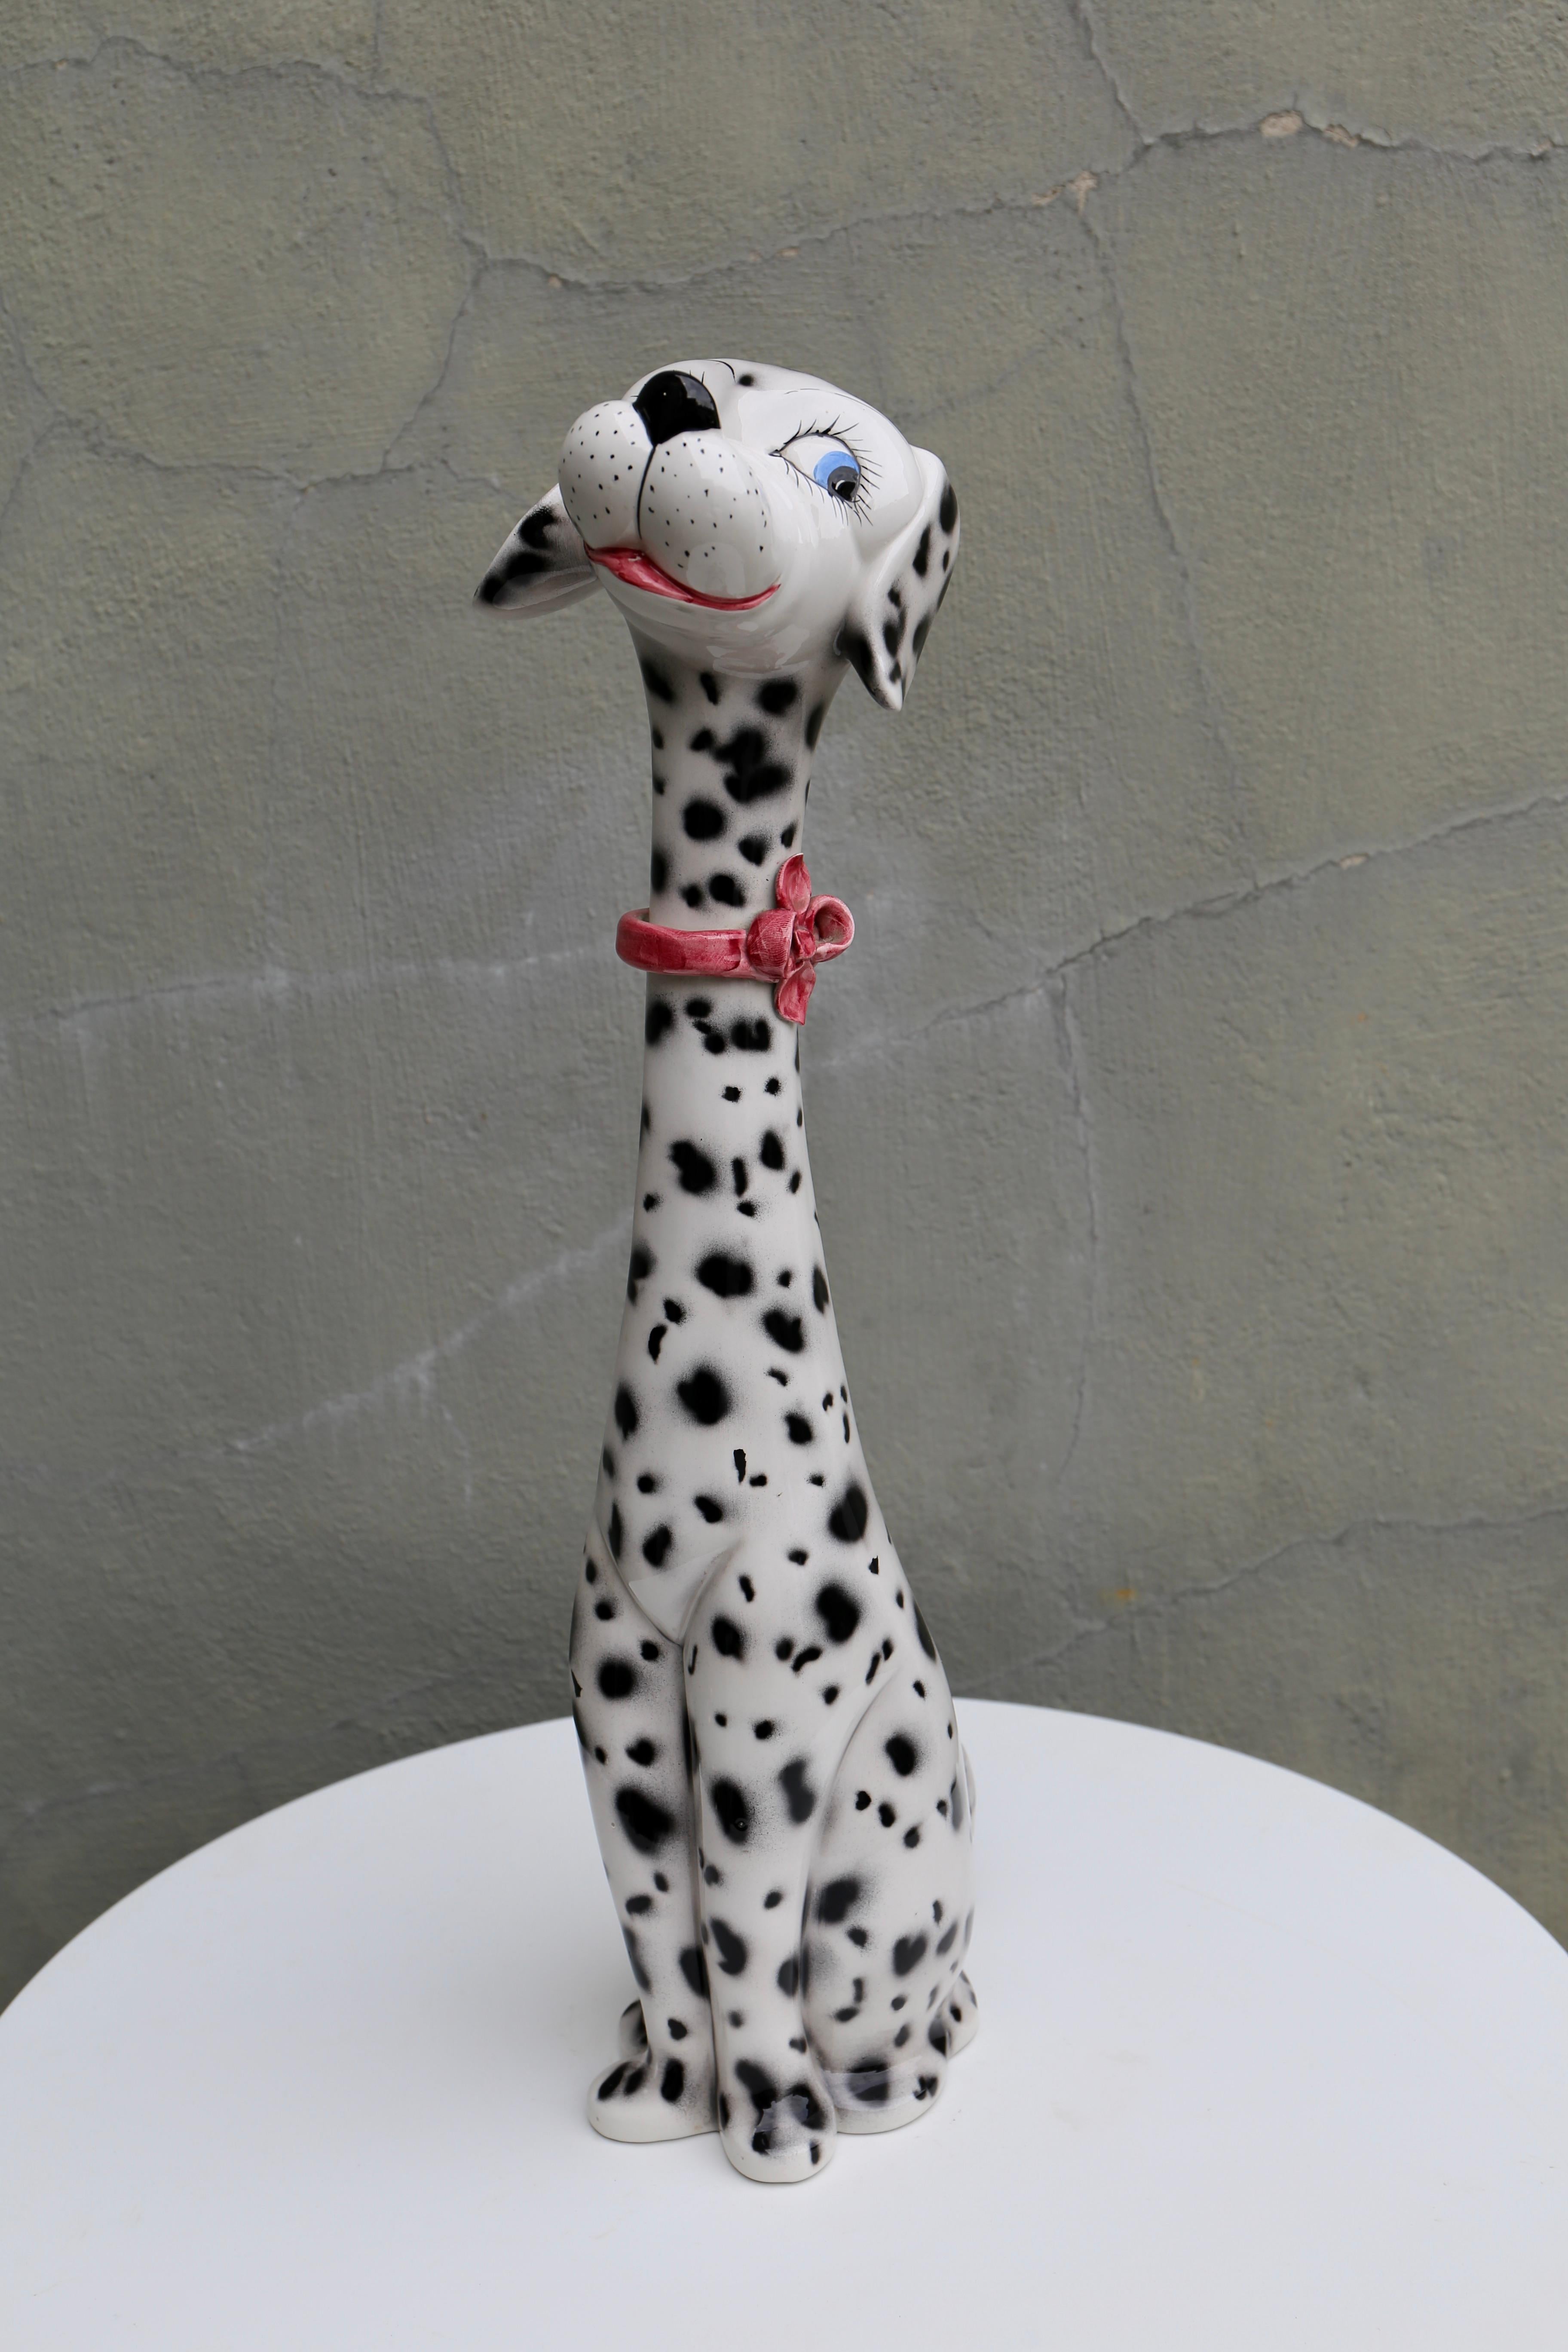 Vintage ceramic Dalmatian dog with cute red bow and adorable eyes, marked Italy on the base.

Height: 60 cm.
